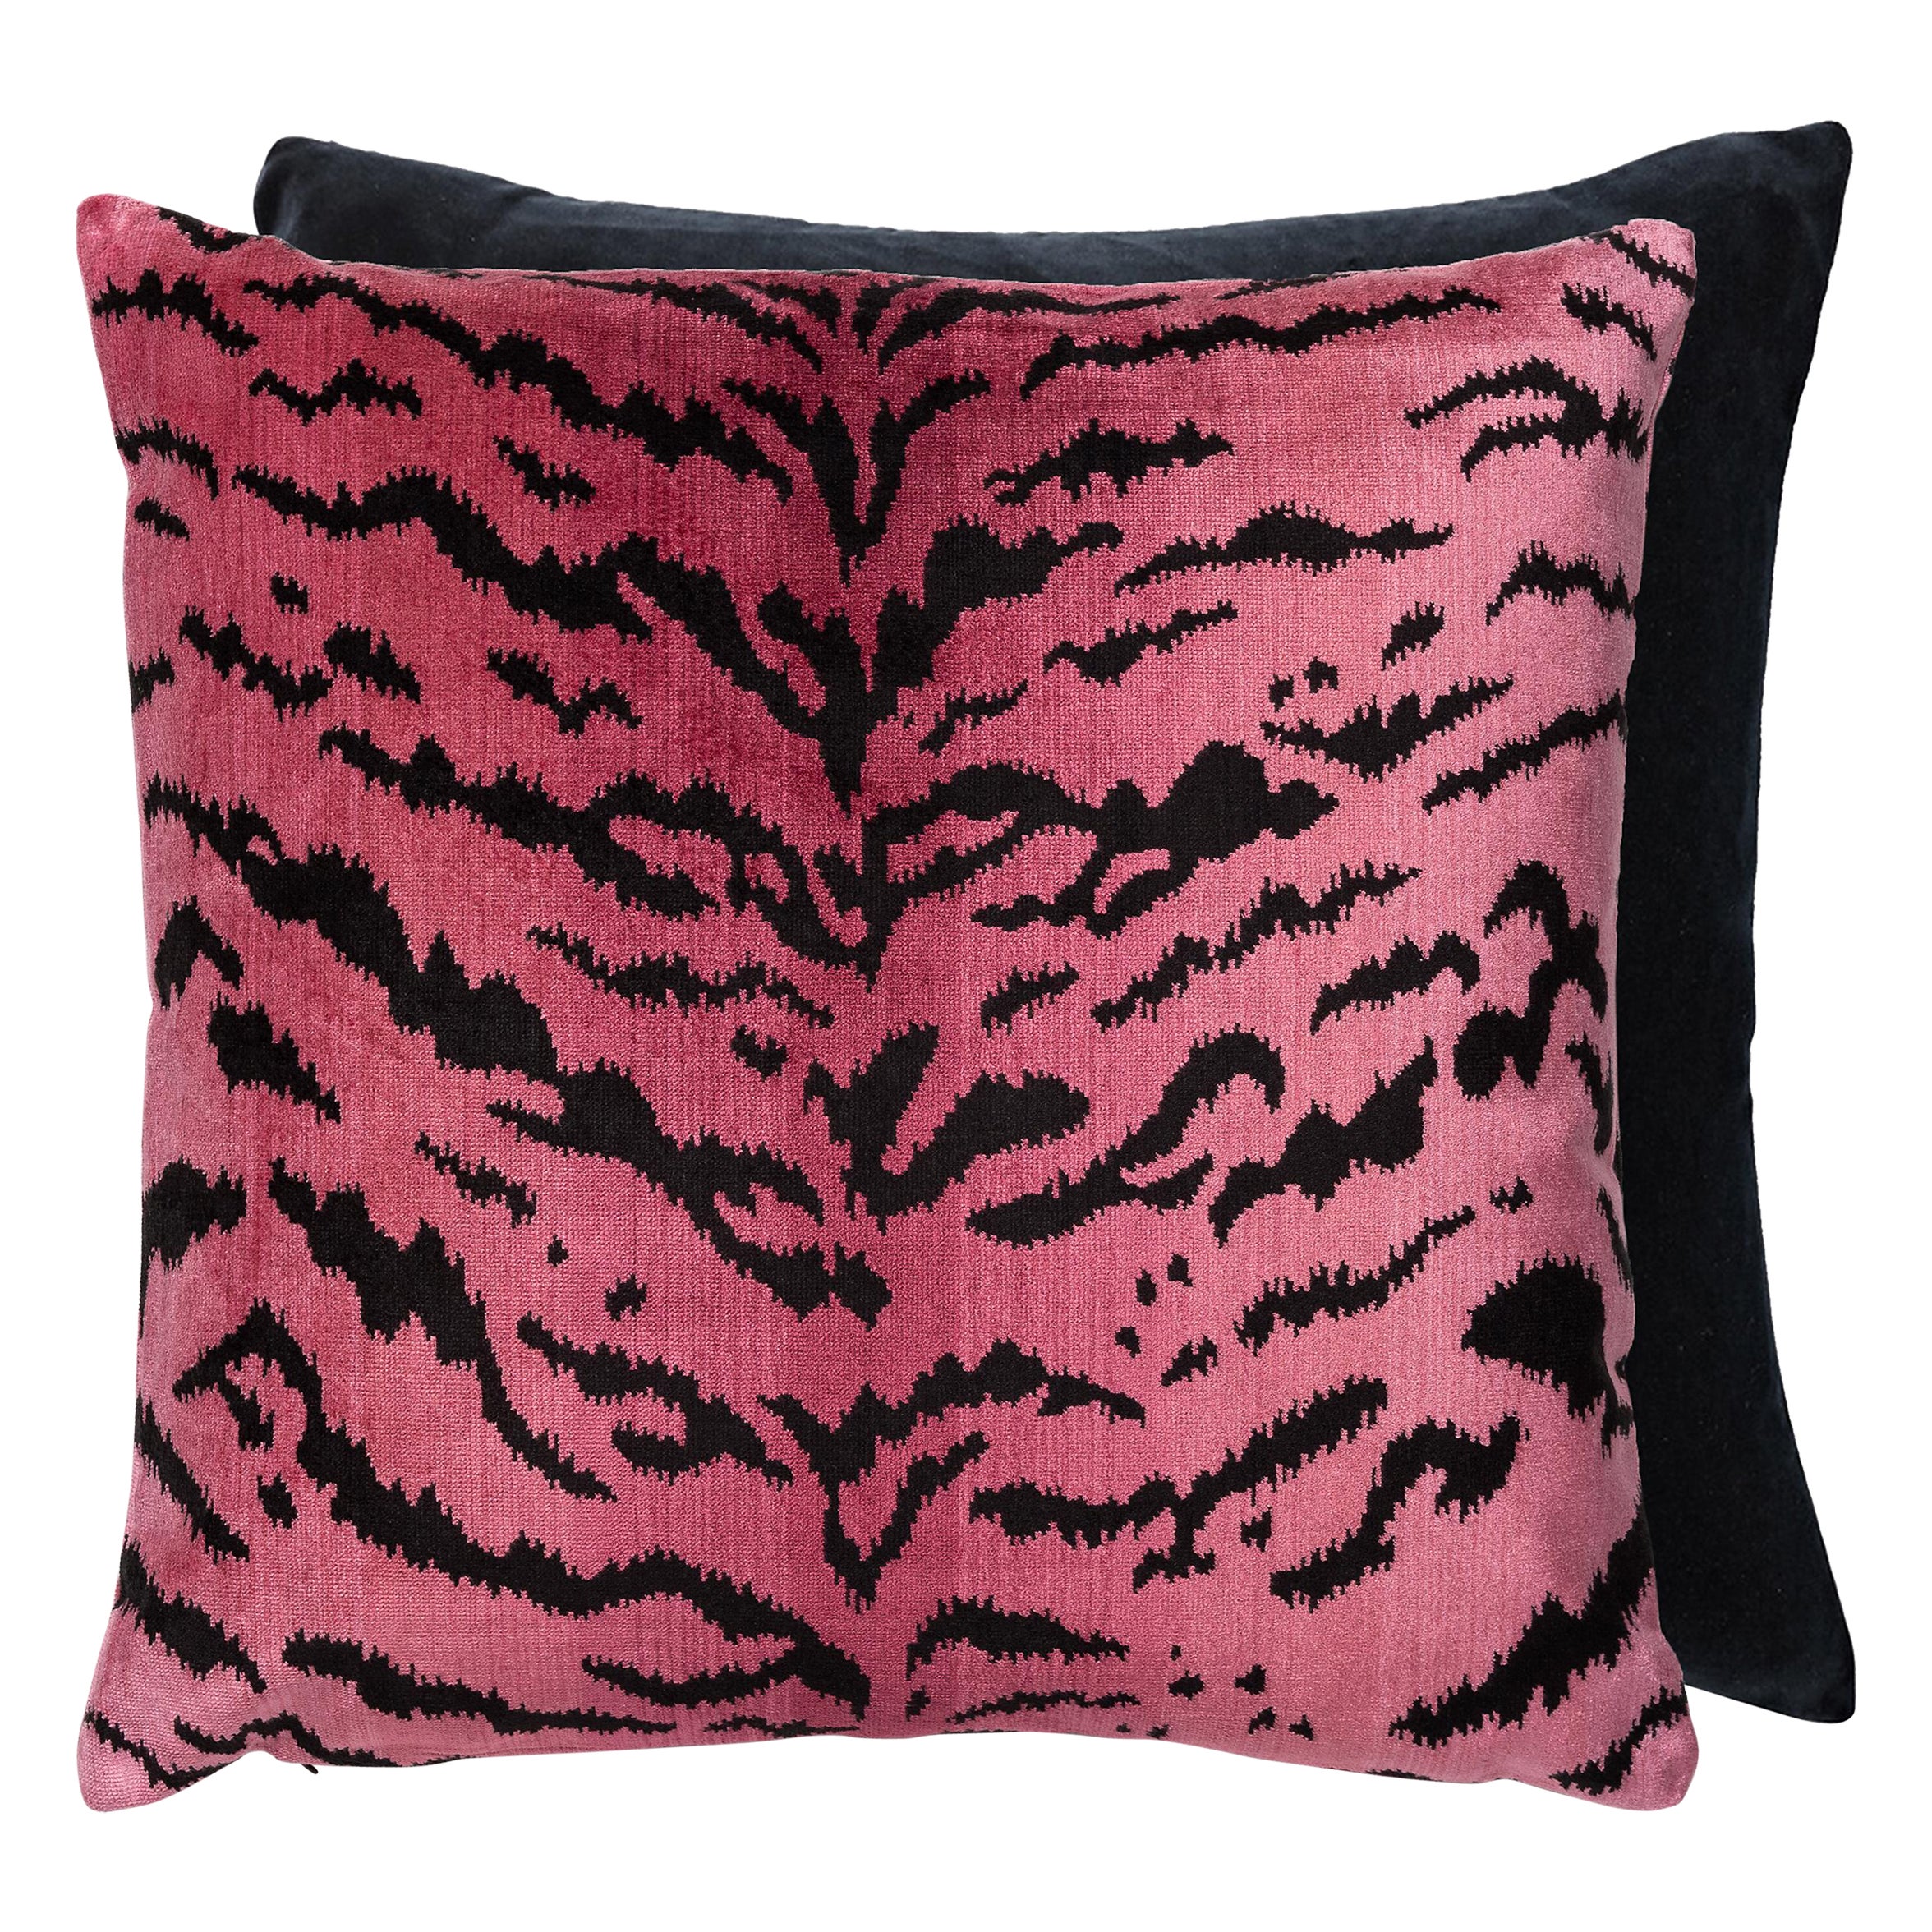 Tigre/Indus Pillow For Sale